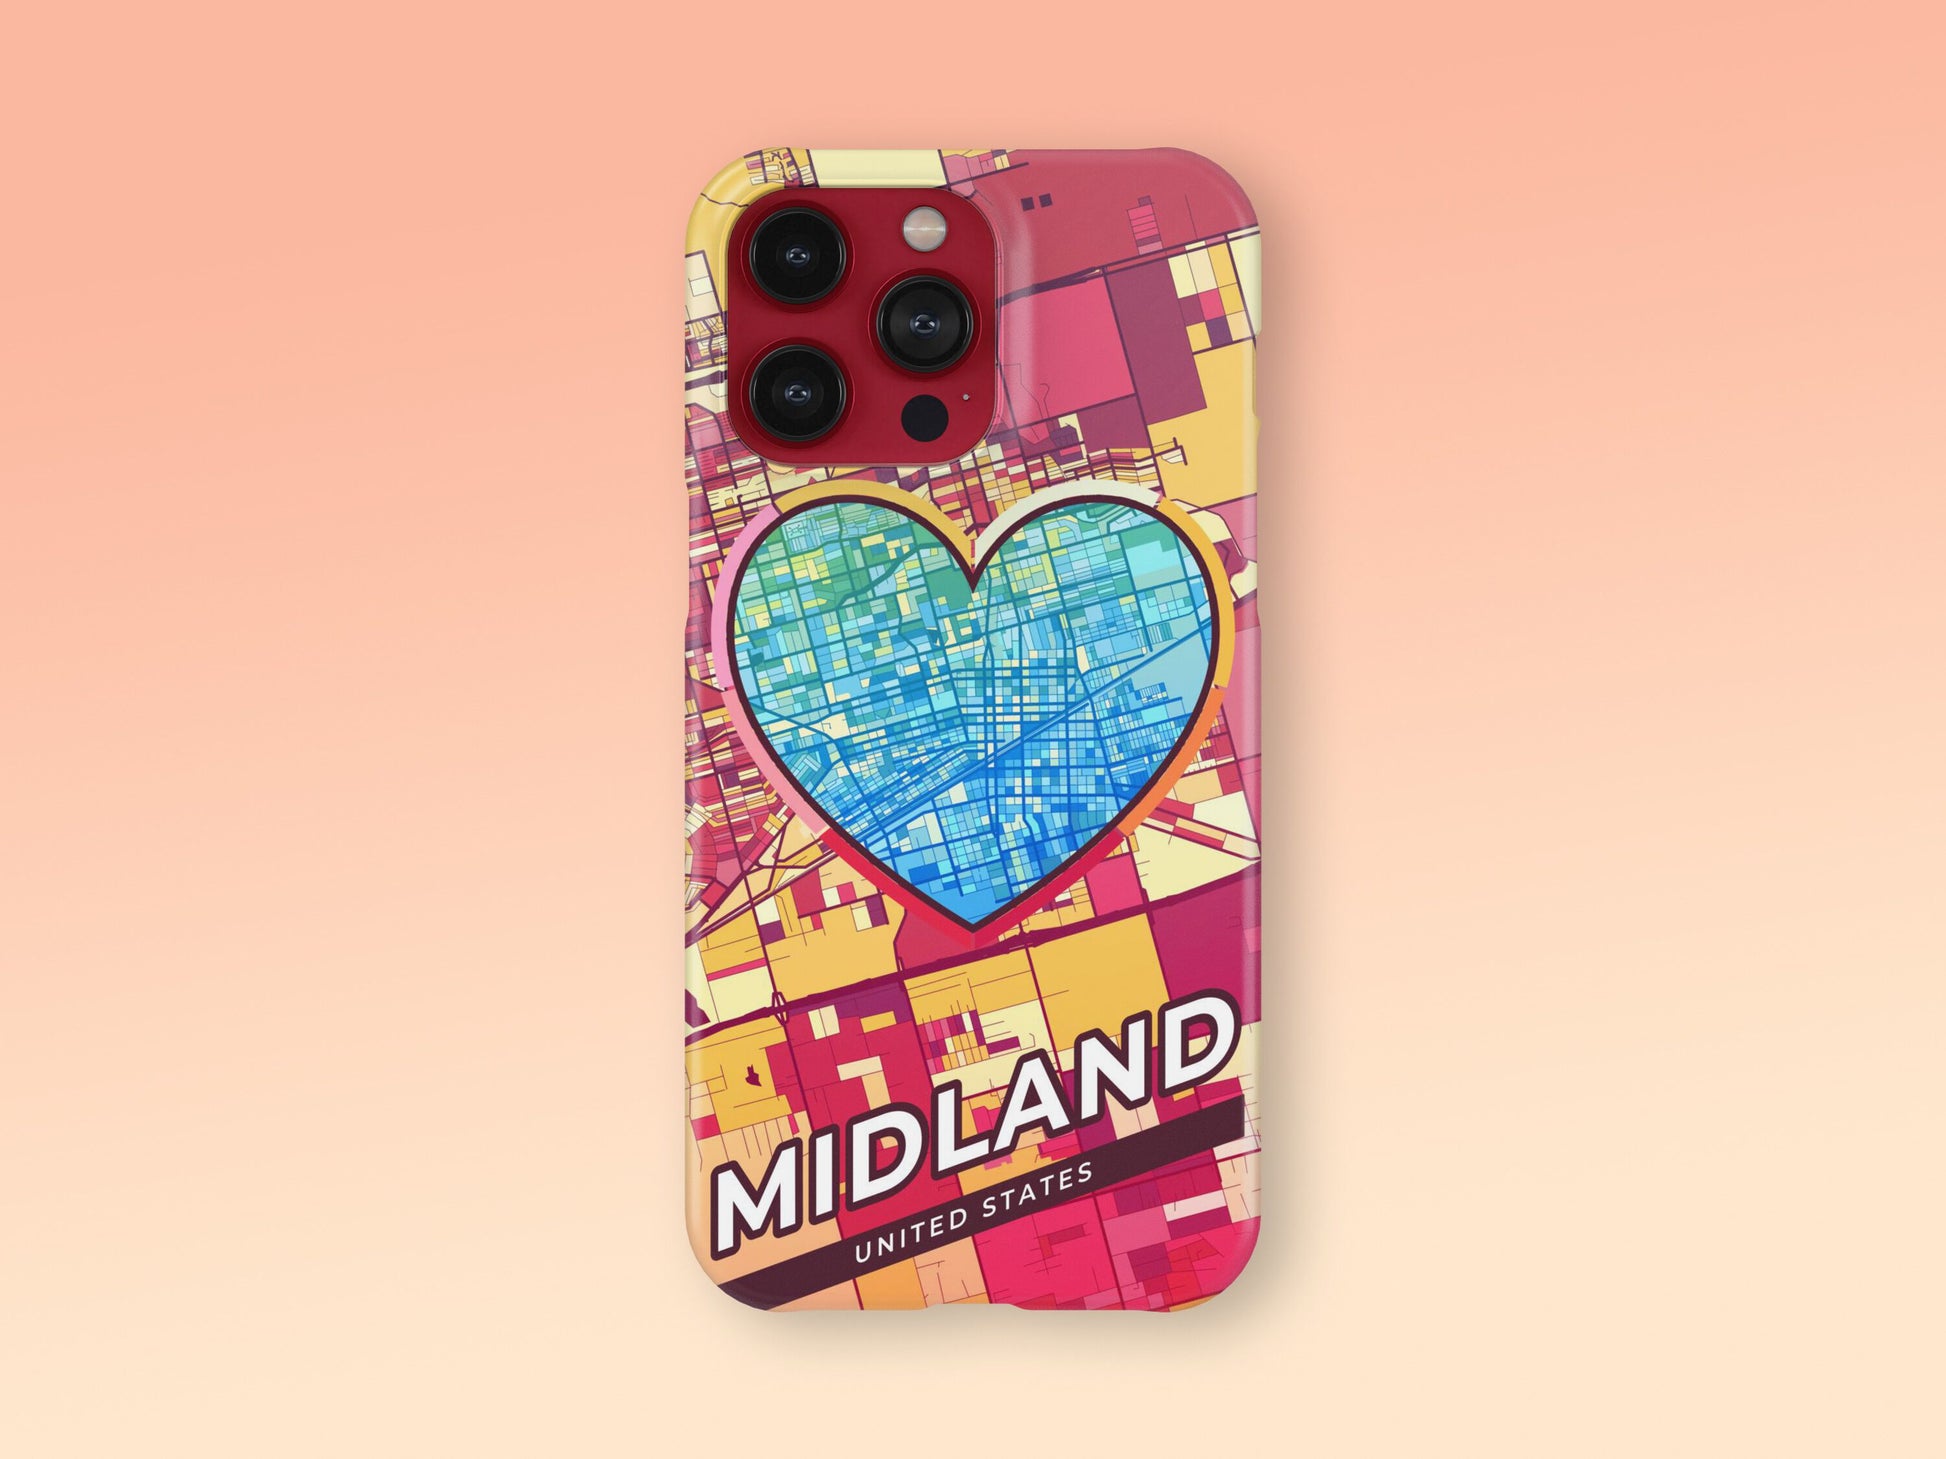 Midland Texas slim phone case with colorful icon 2